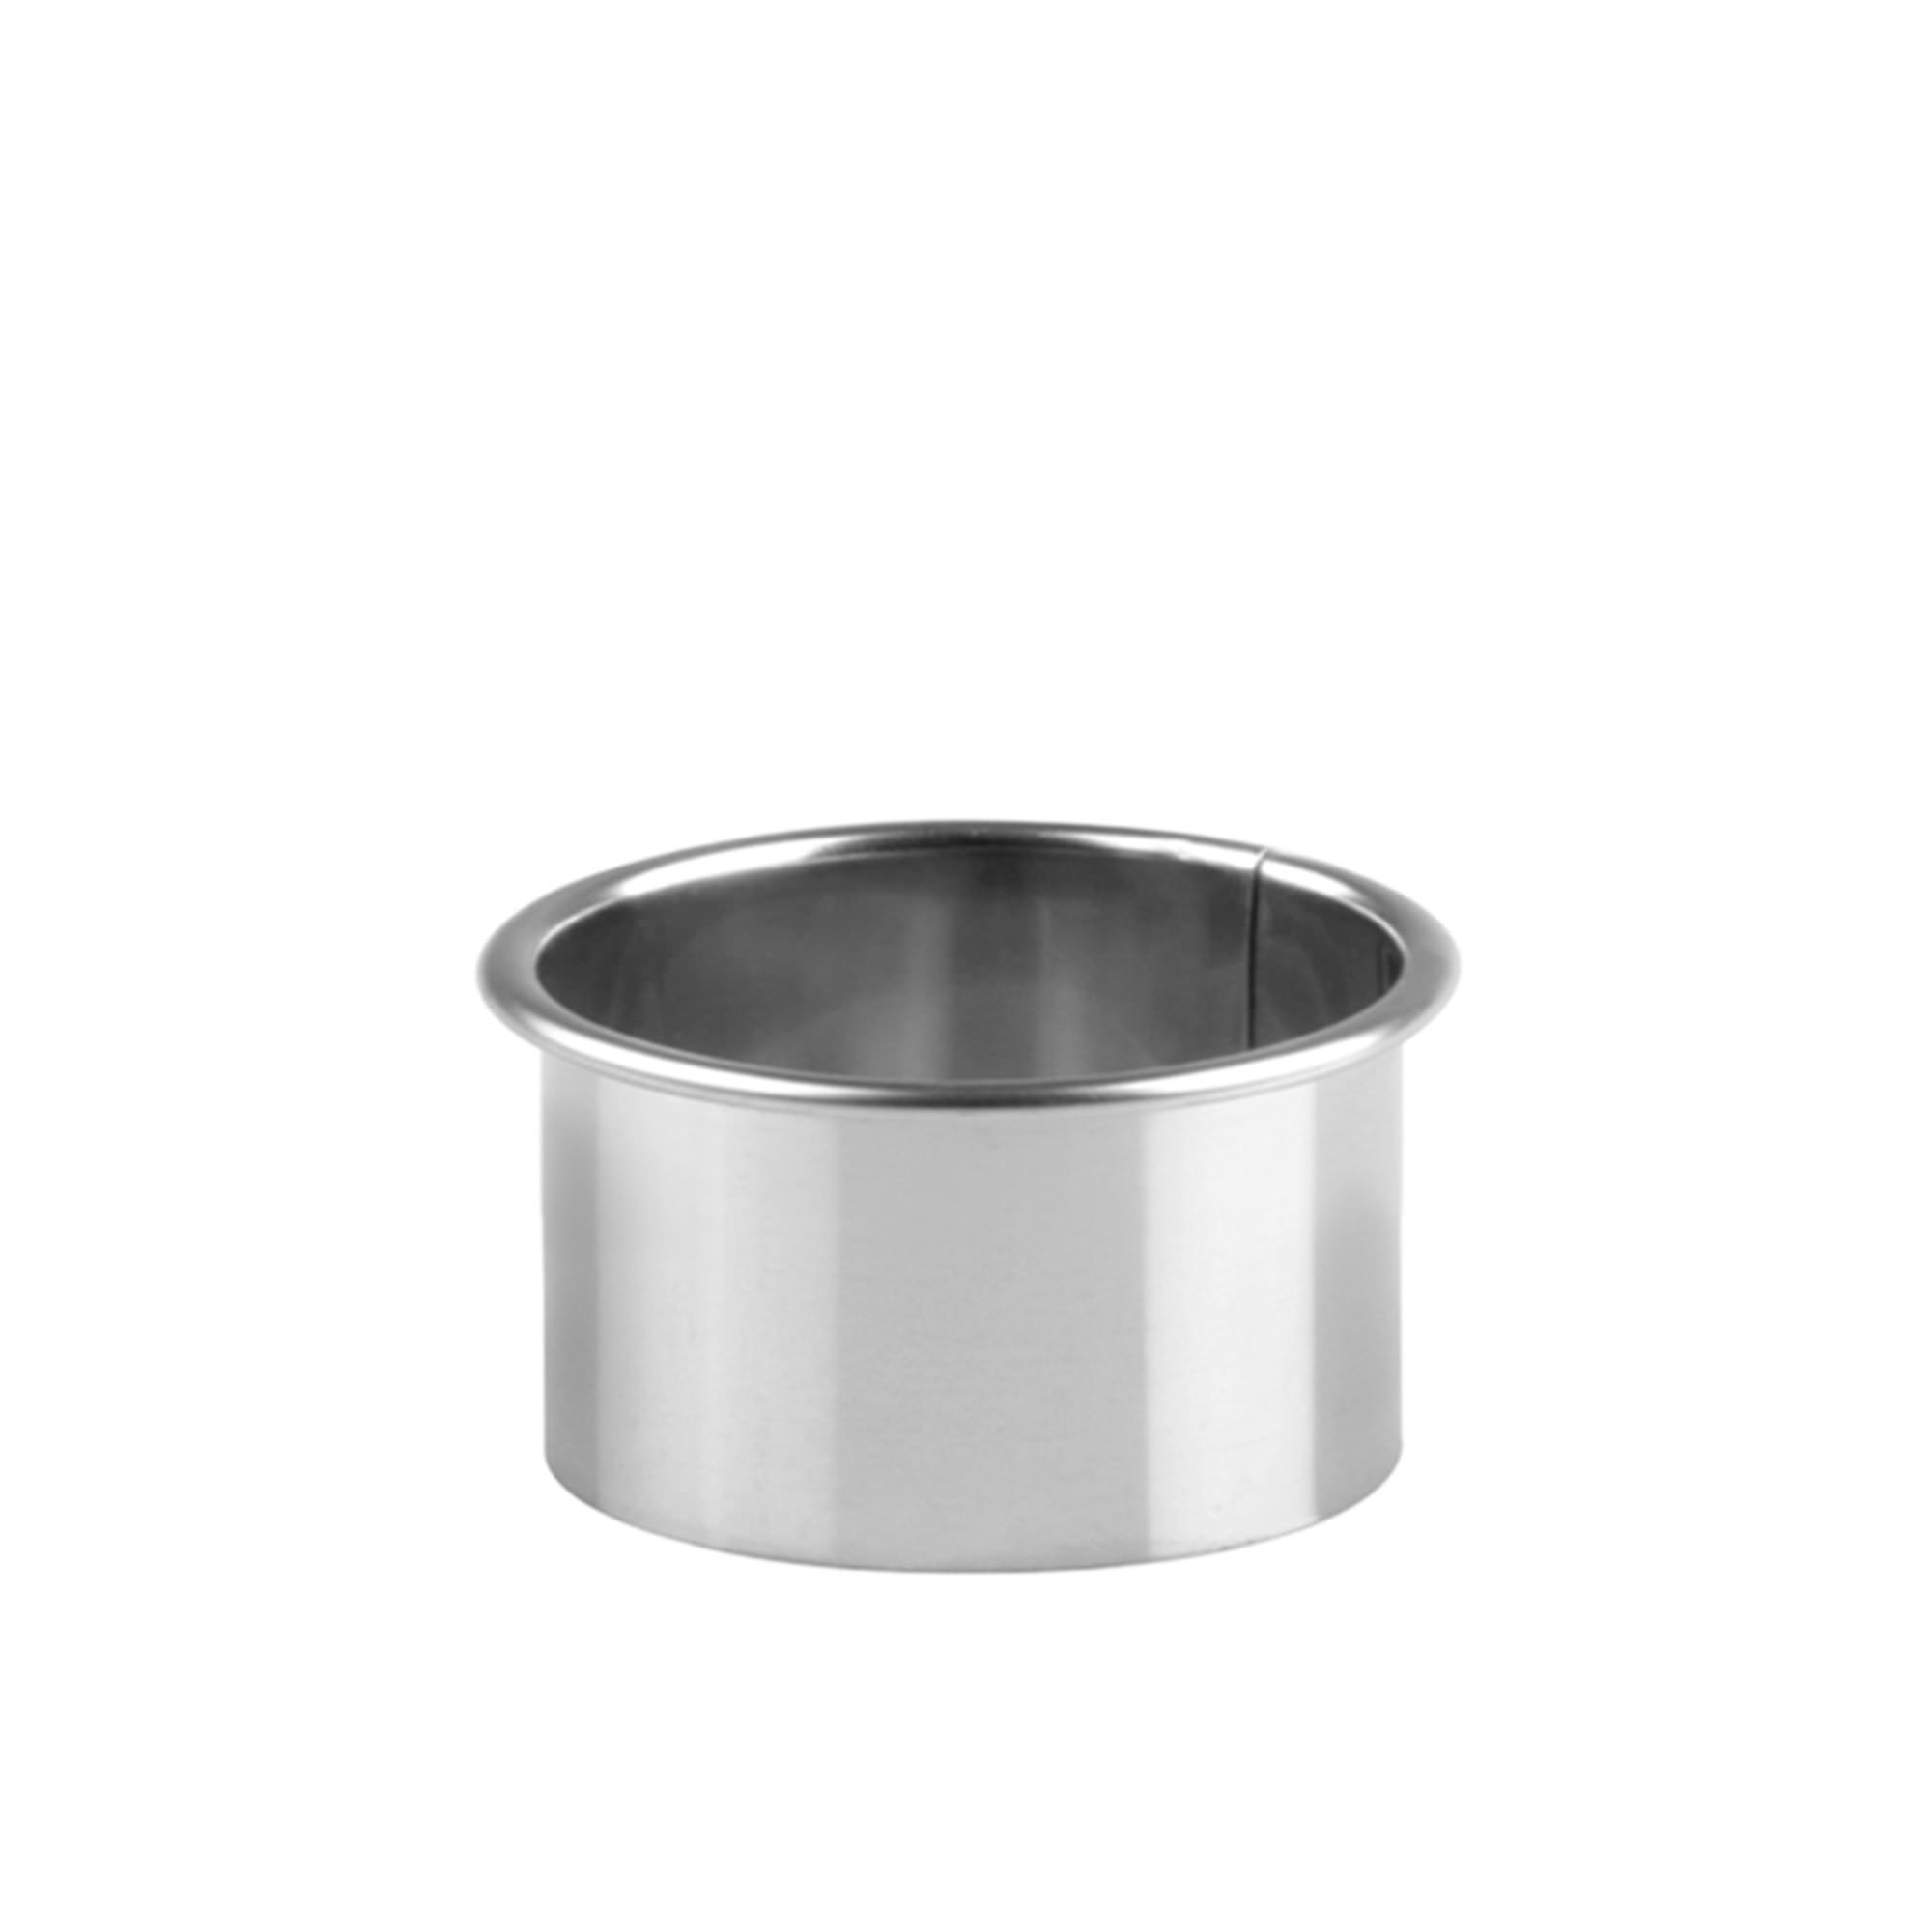 Chef Inox Stainless Steel Plain Biscuit Cutter 9cm Image 1